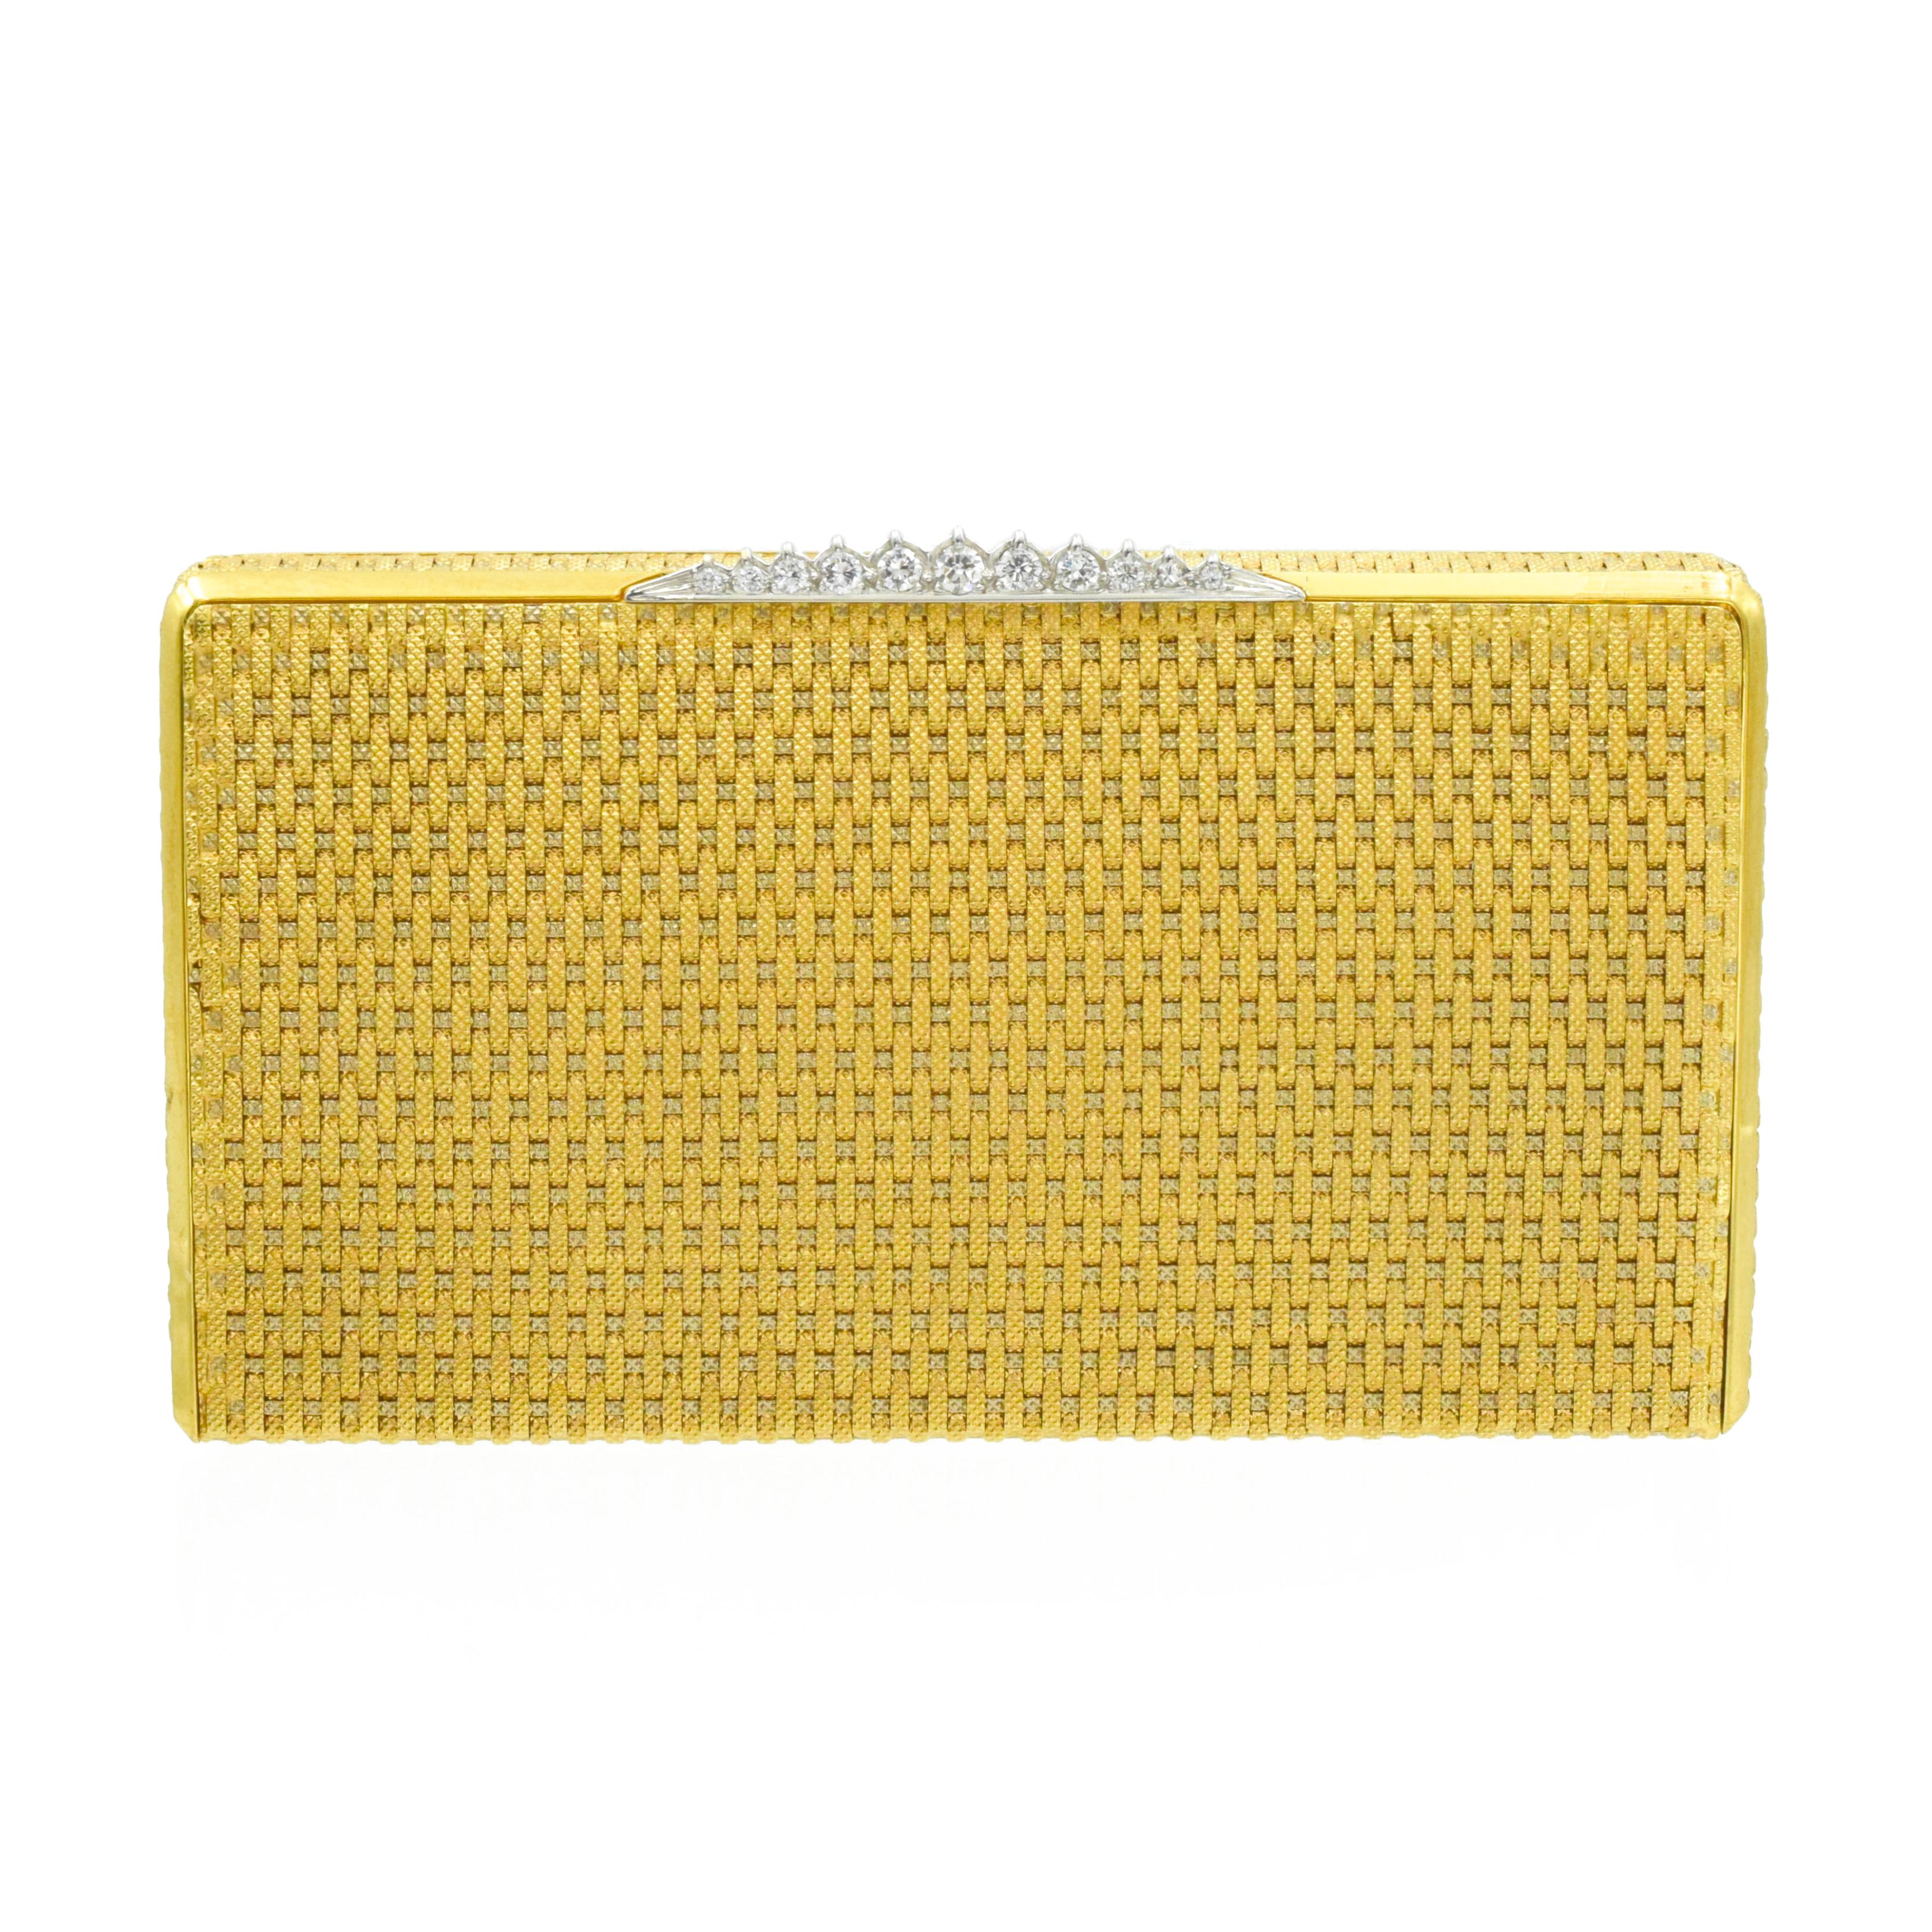 Piaget , gold and diamond case, This rectangular cigarette case of woven design has a thumbpiece enhanced with brilliant-cut diamonds. 
The box measured to be approximately 90 x 50 x 15mm, 
Signed Piaget and numbered with French maker's mark,
.Gold